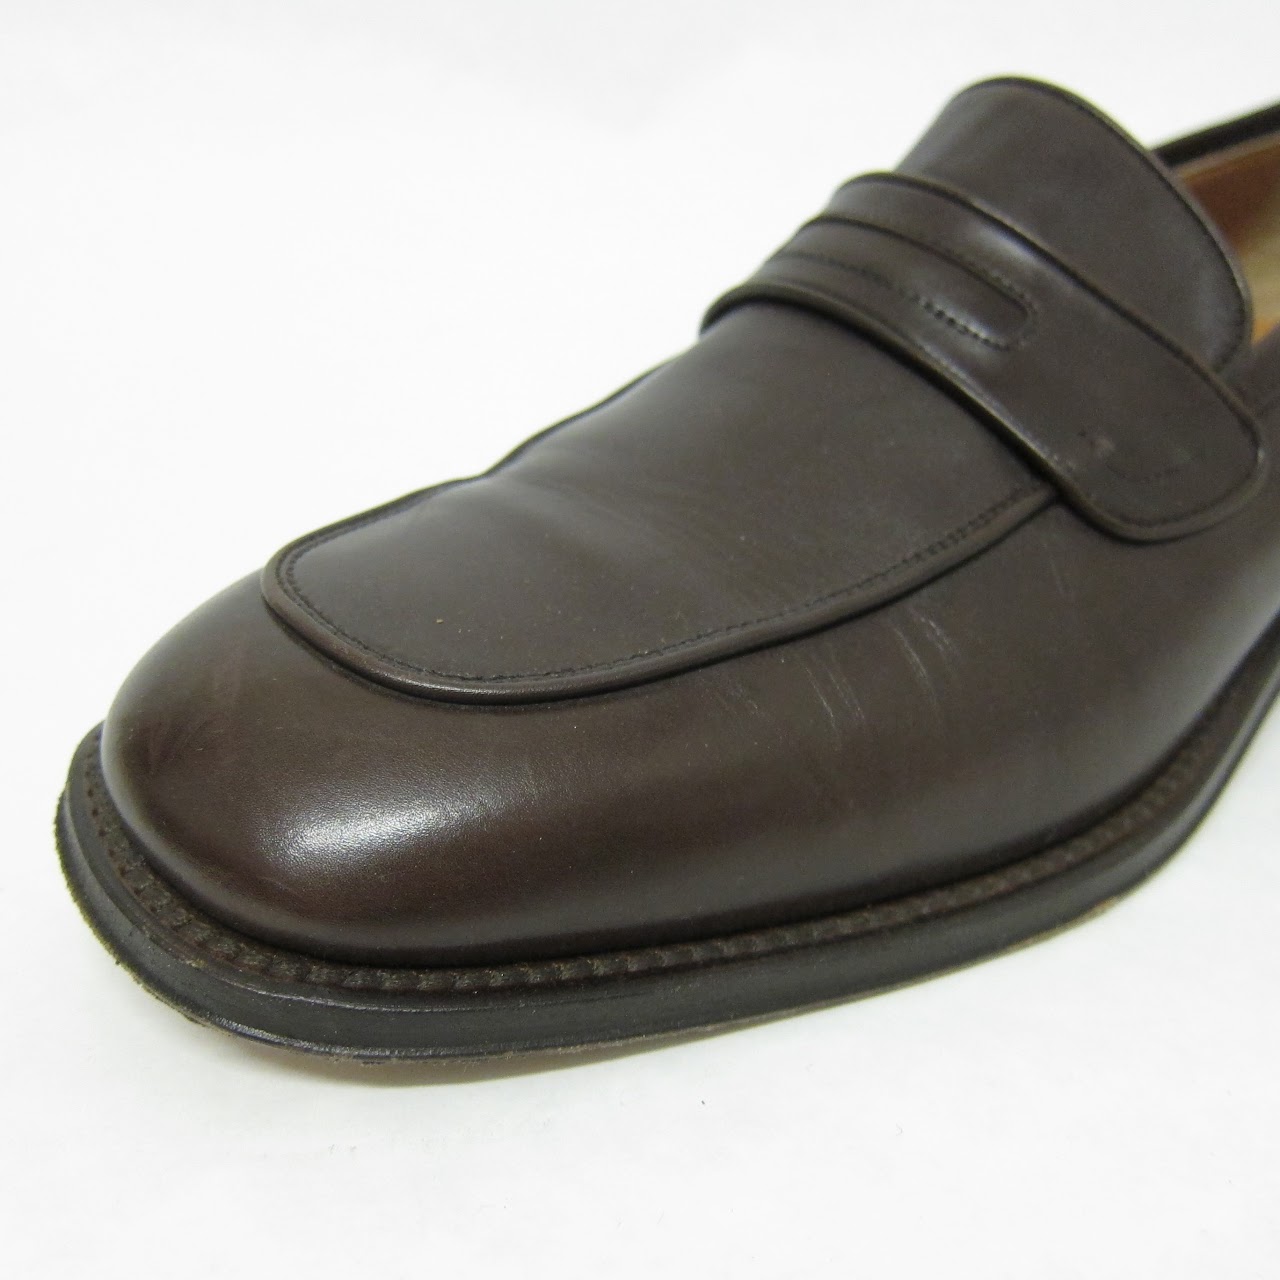 Bally Chocolate Leather Penny Loafers